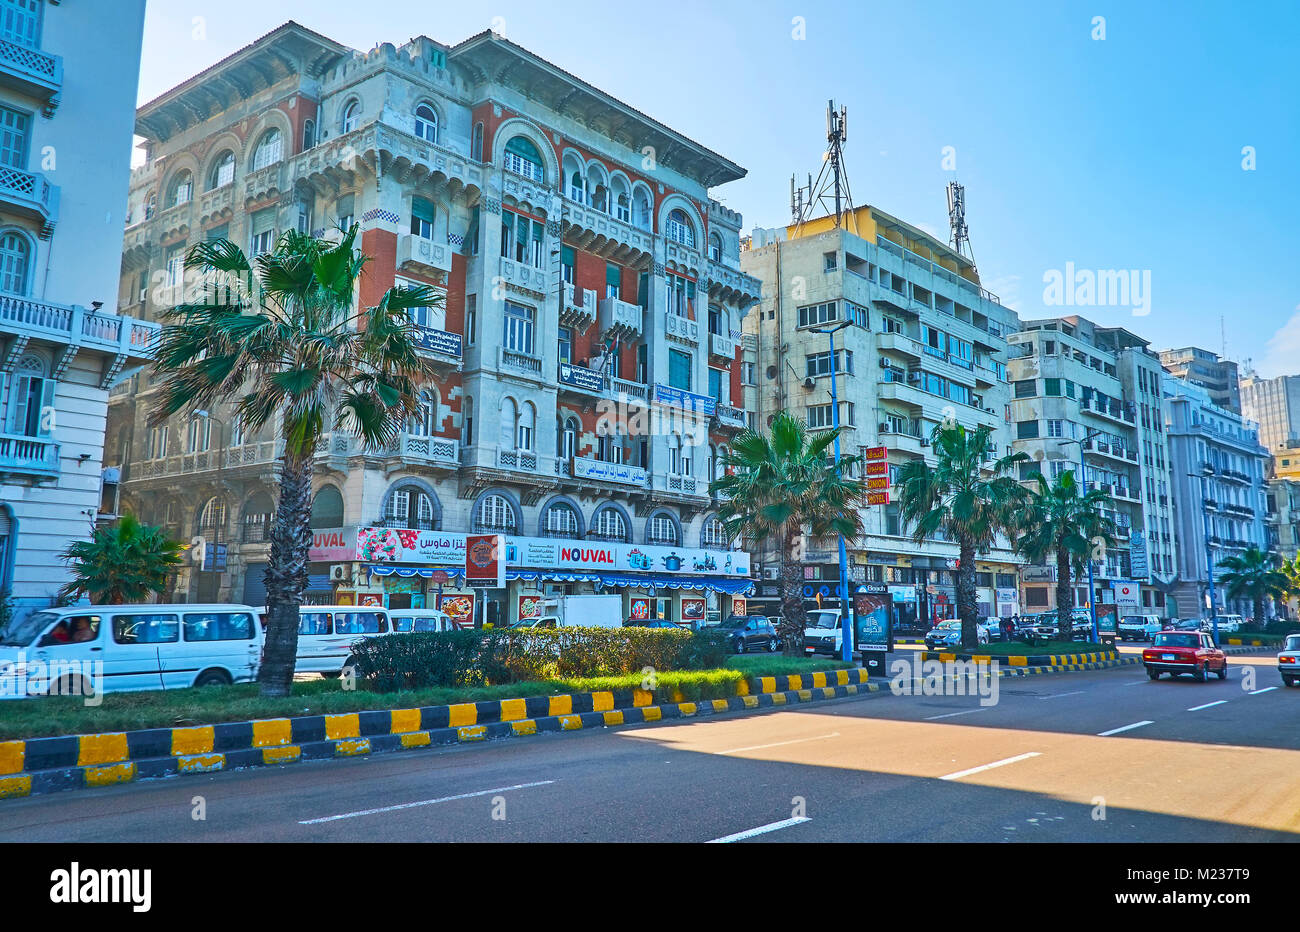 ALEXANDRIA, EGYPT - DECEMBER 17, 2017: The walk along the Corniche avenue with preserved historic mansions, beautiful palms and busy road, on December Stock Photo